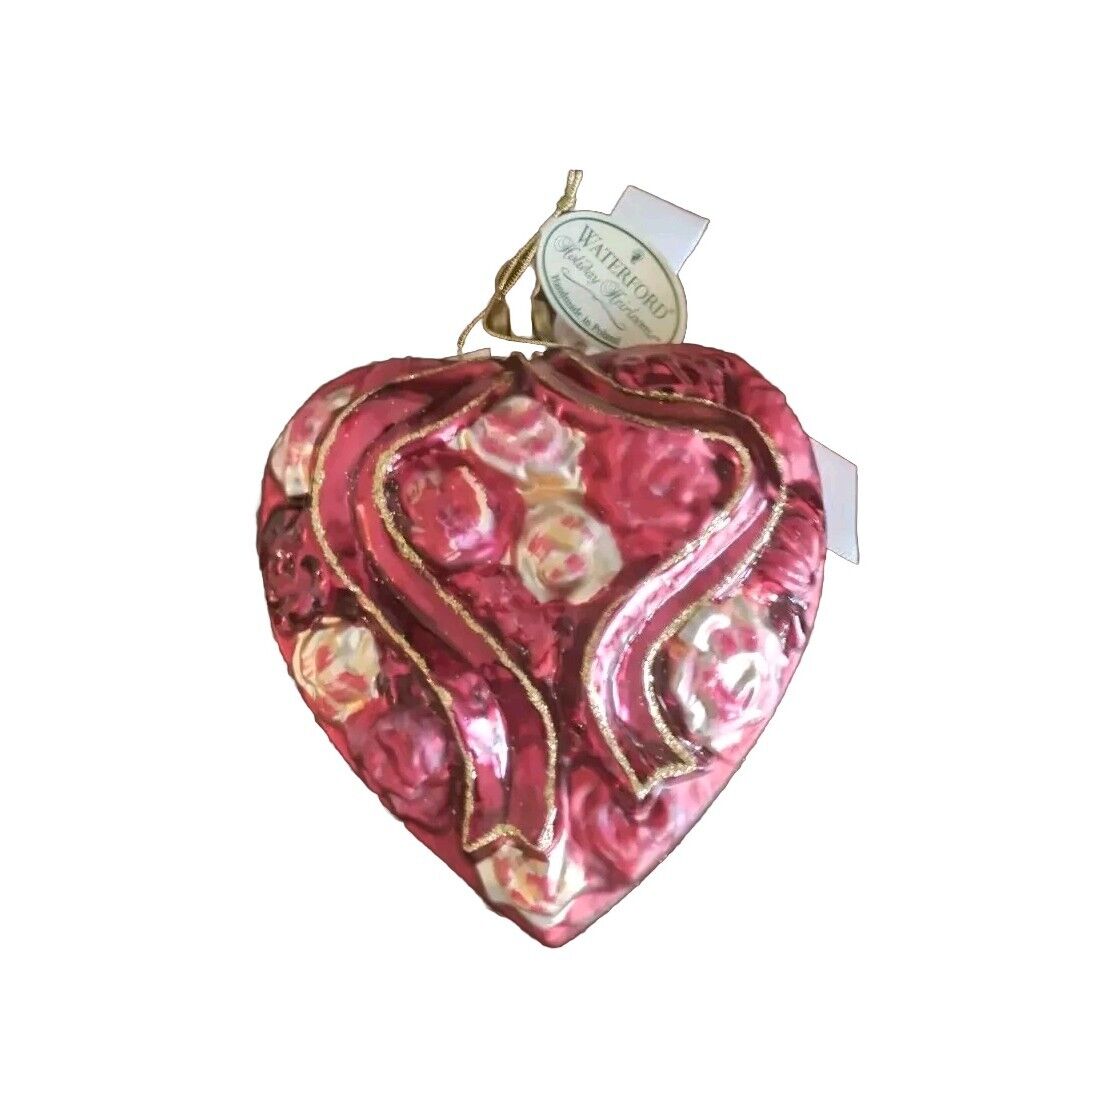 Vintage Waterford Holiday Heirlooms Heart With Carnations + Box.